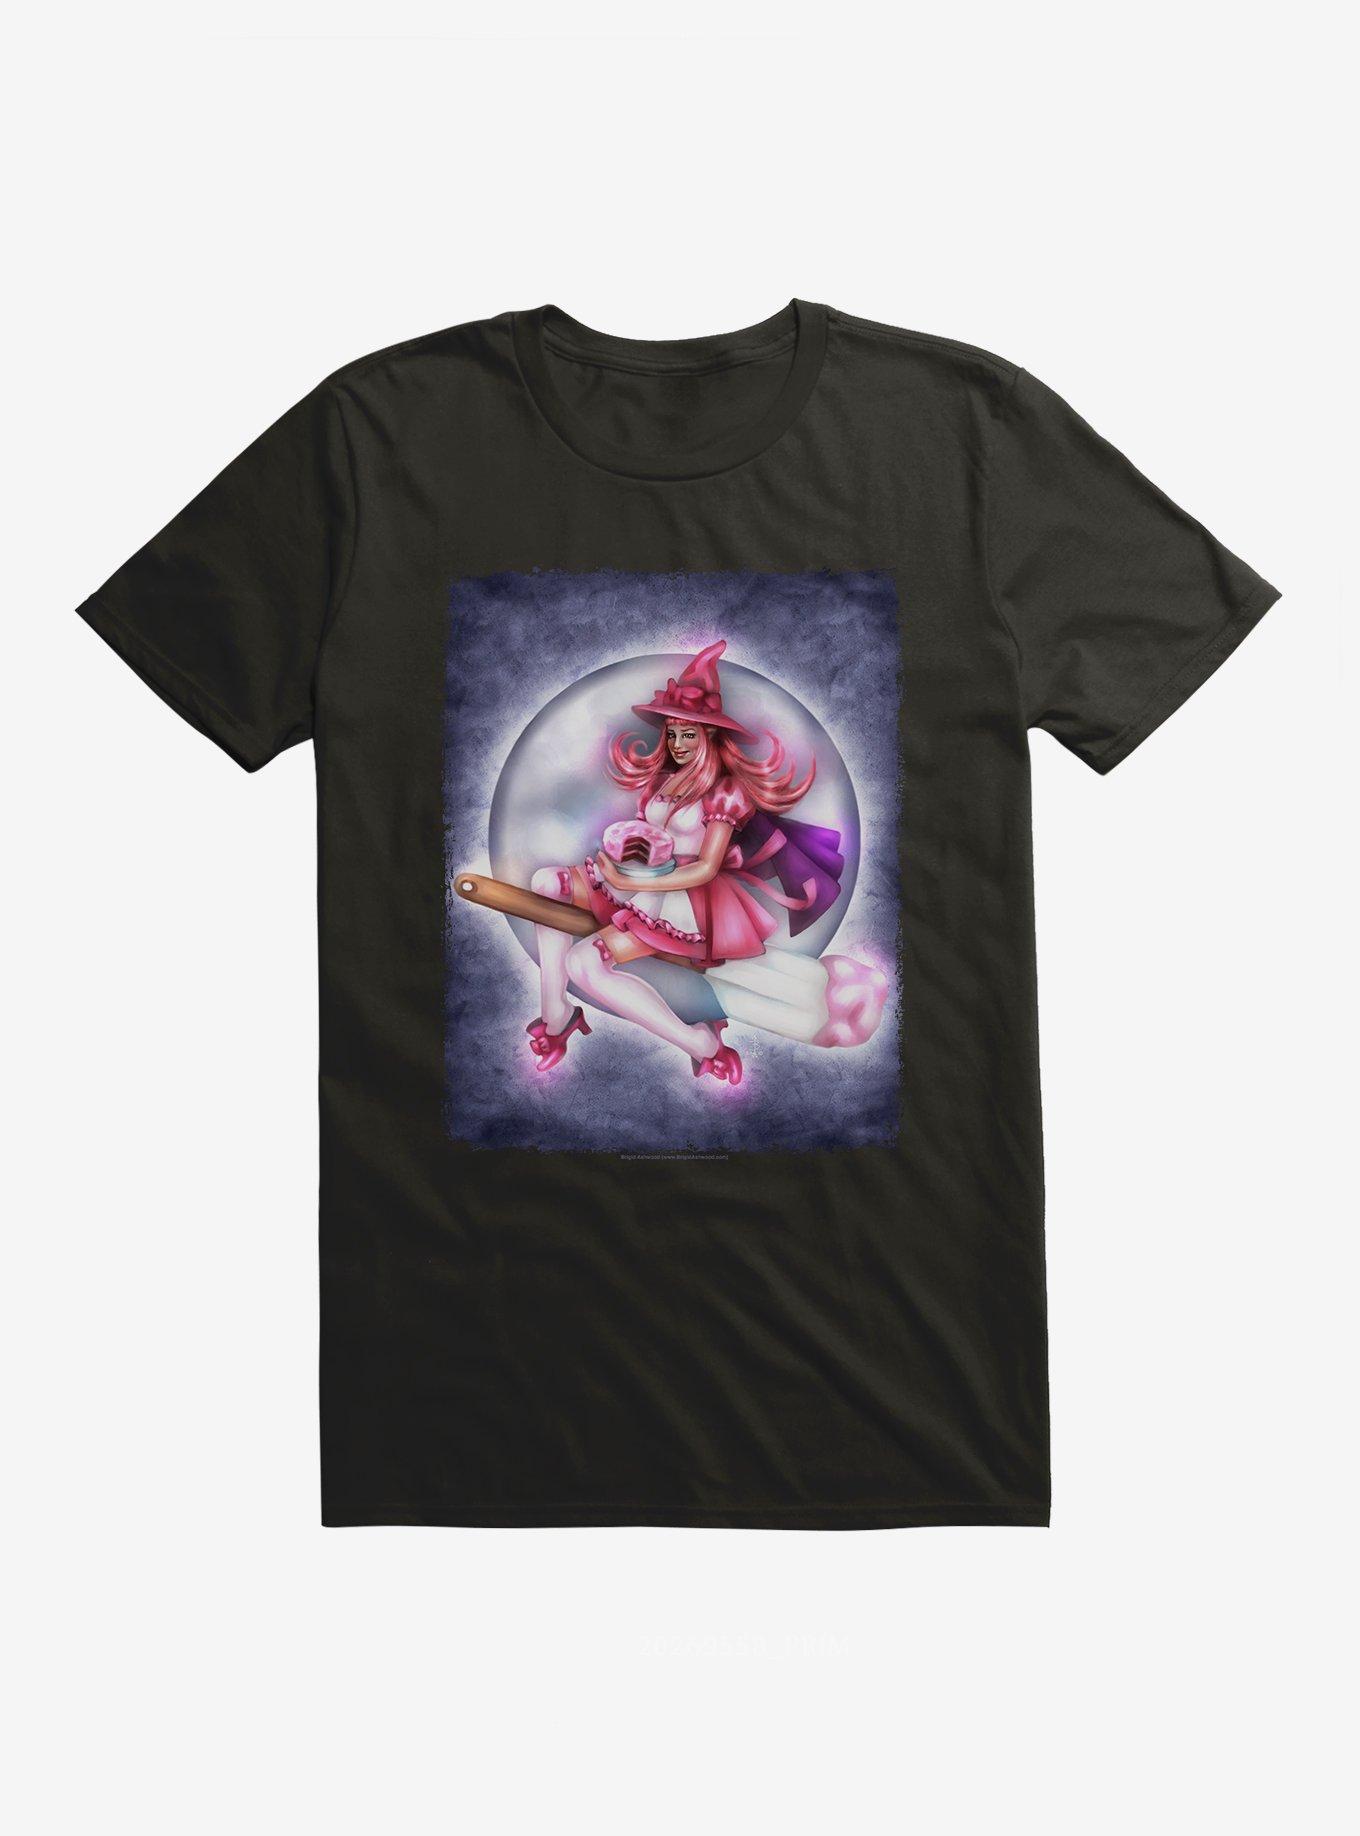 Frosted Fantasia Witch T-Shirt by Brigid Ashwood